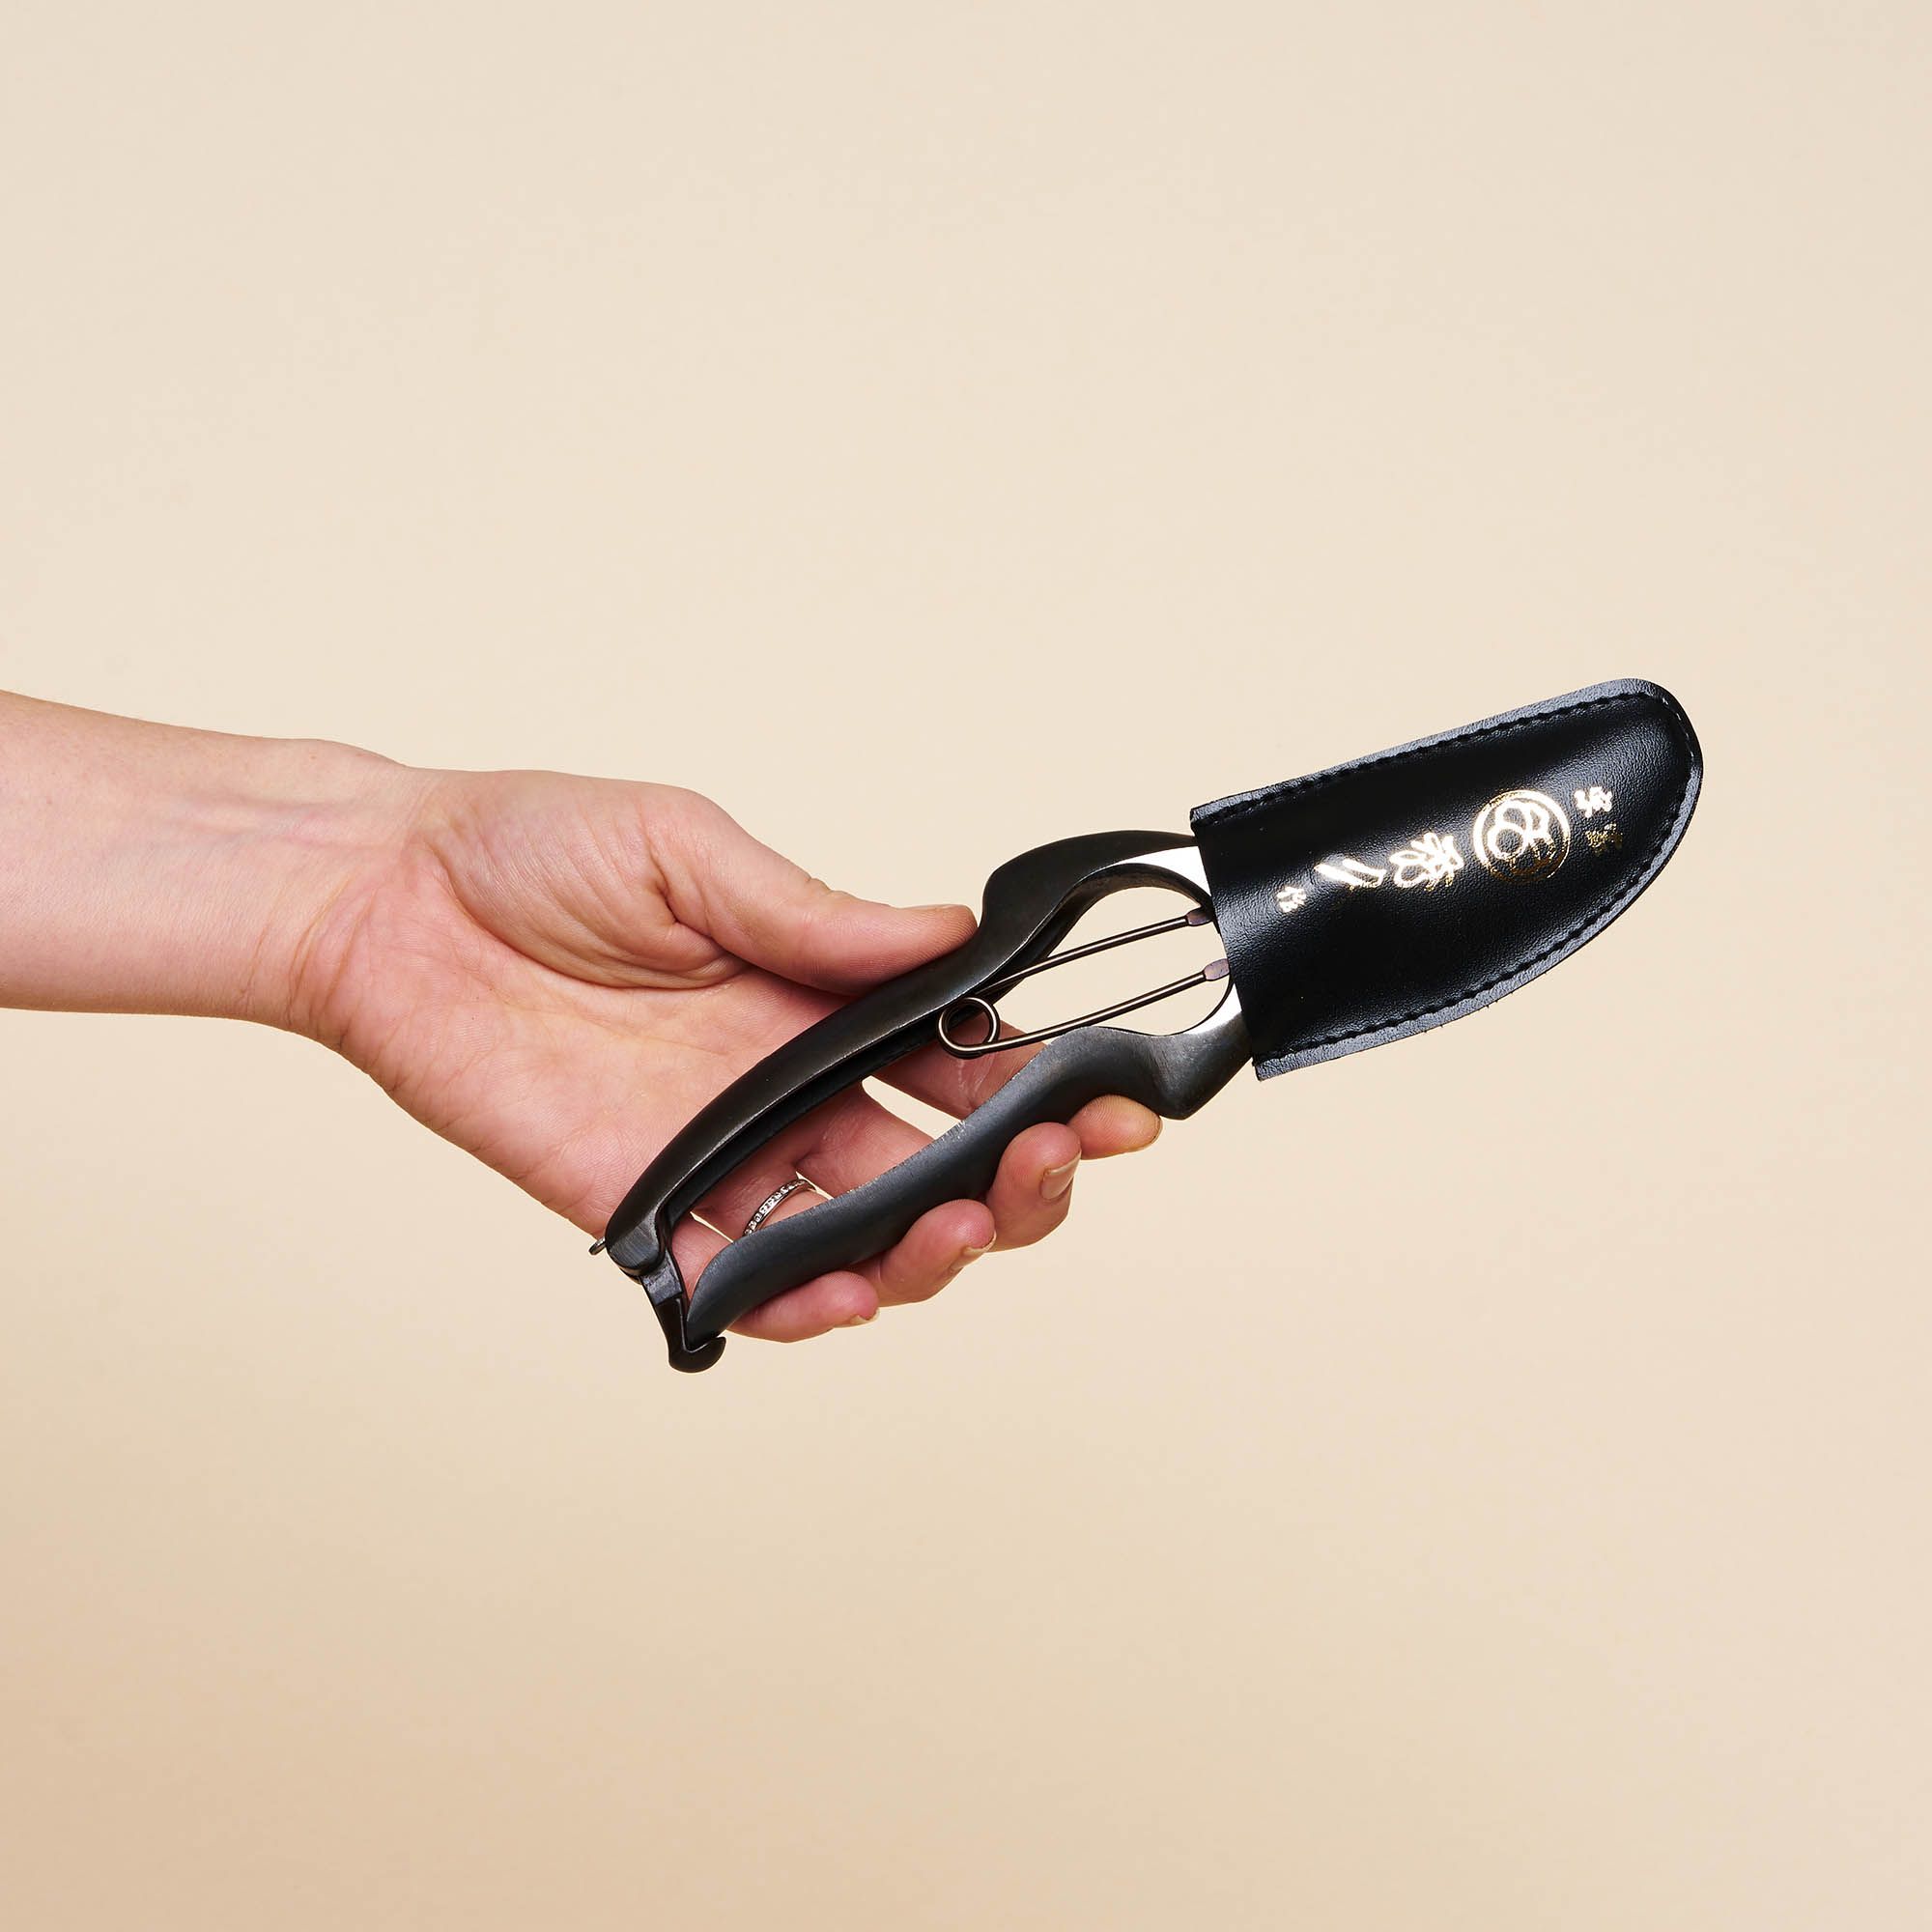 A hand holding sharp gardening pruning shears with a black handle, with a black leather sheath.